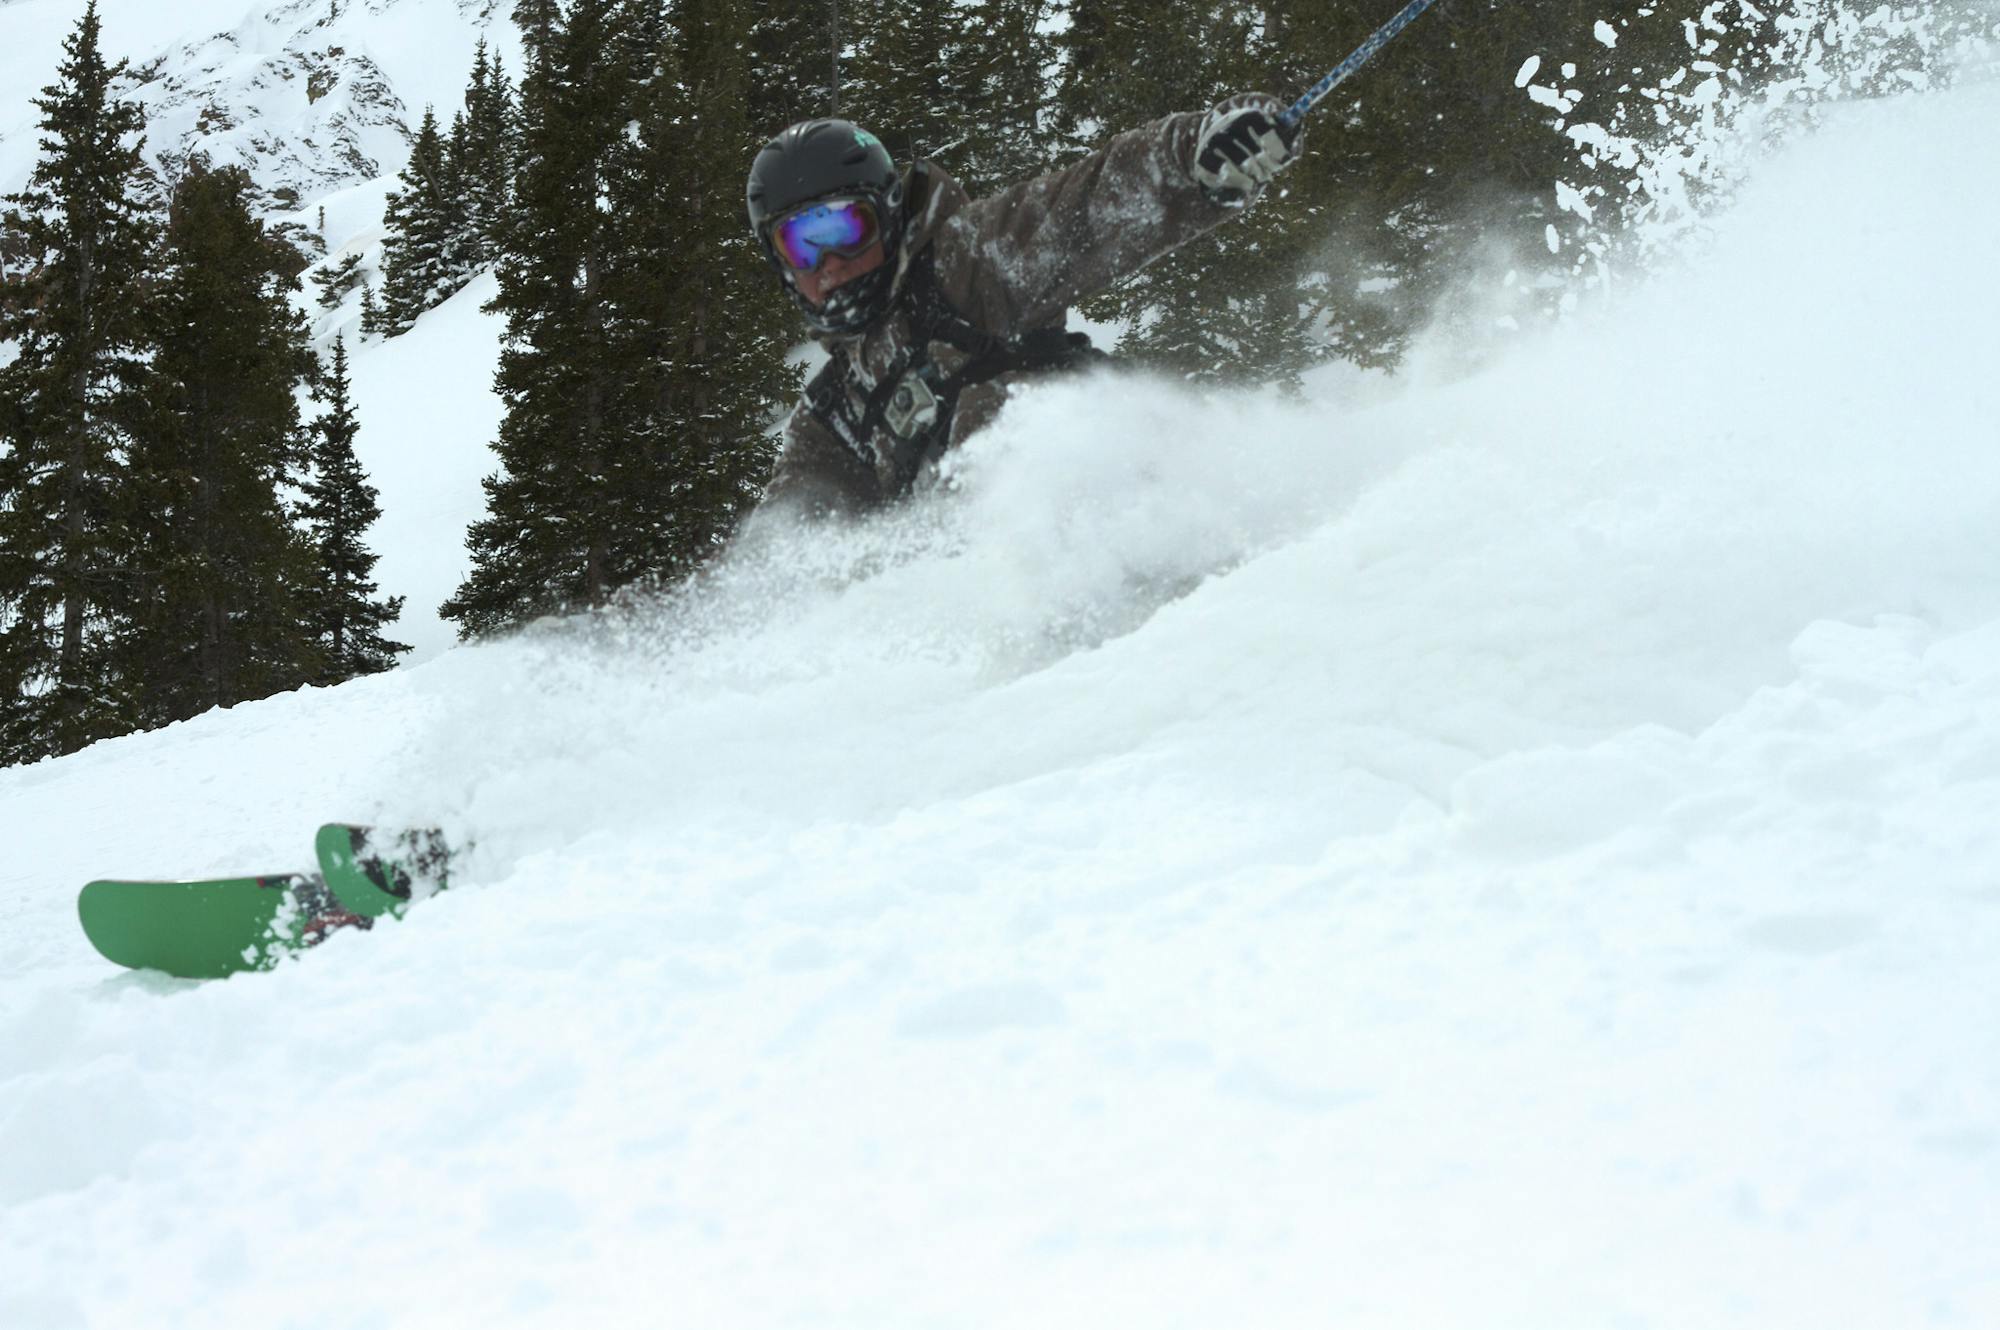 Go big in East Vail's sidecountry